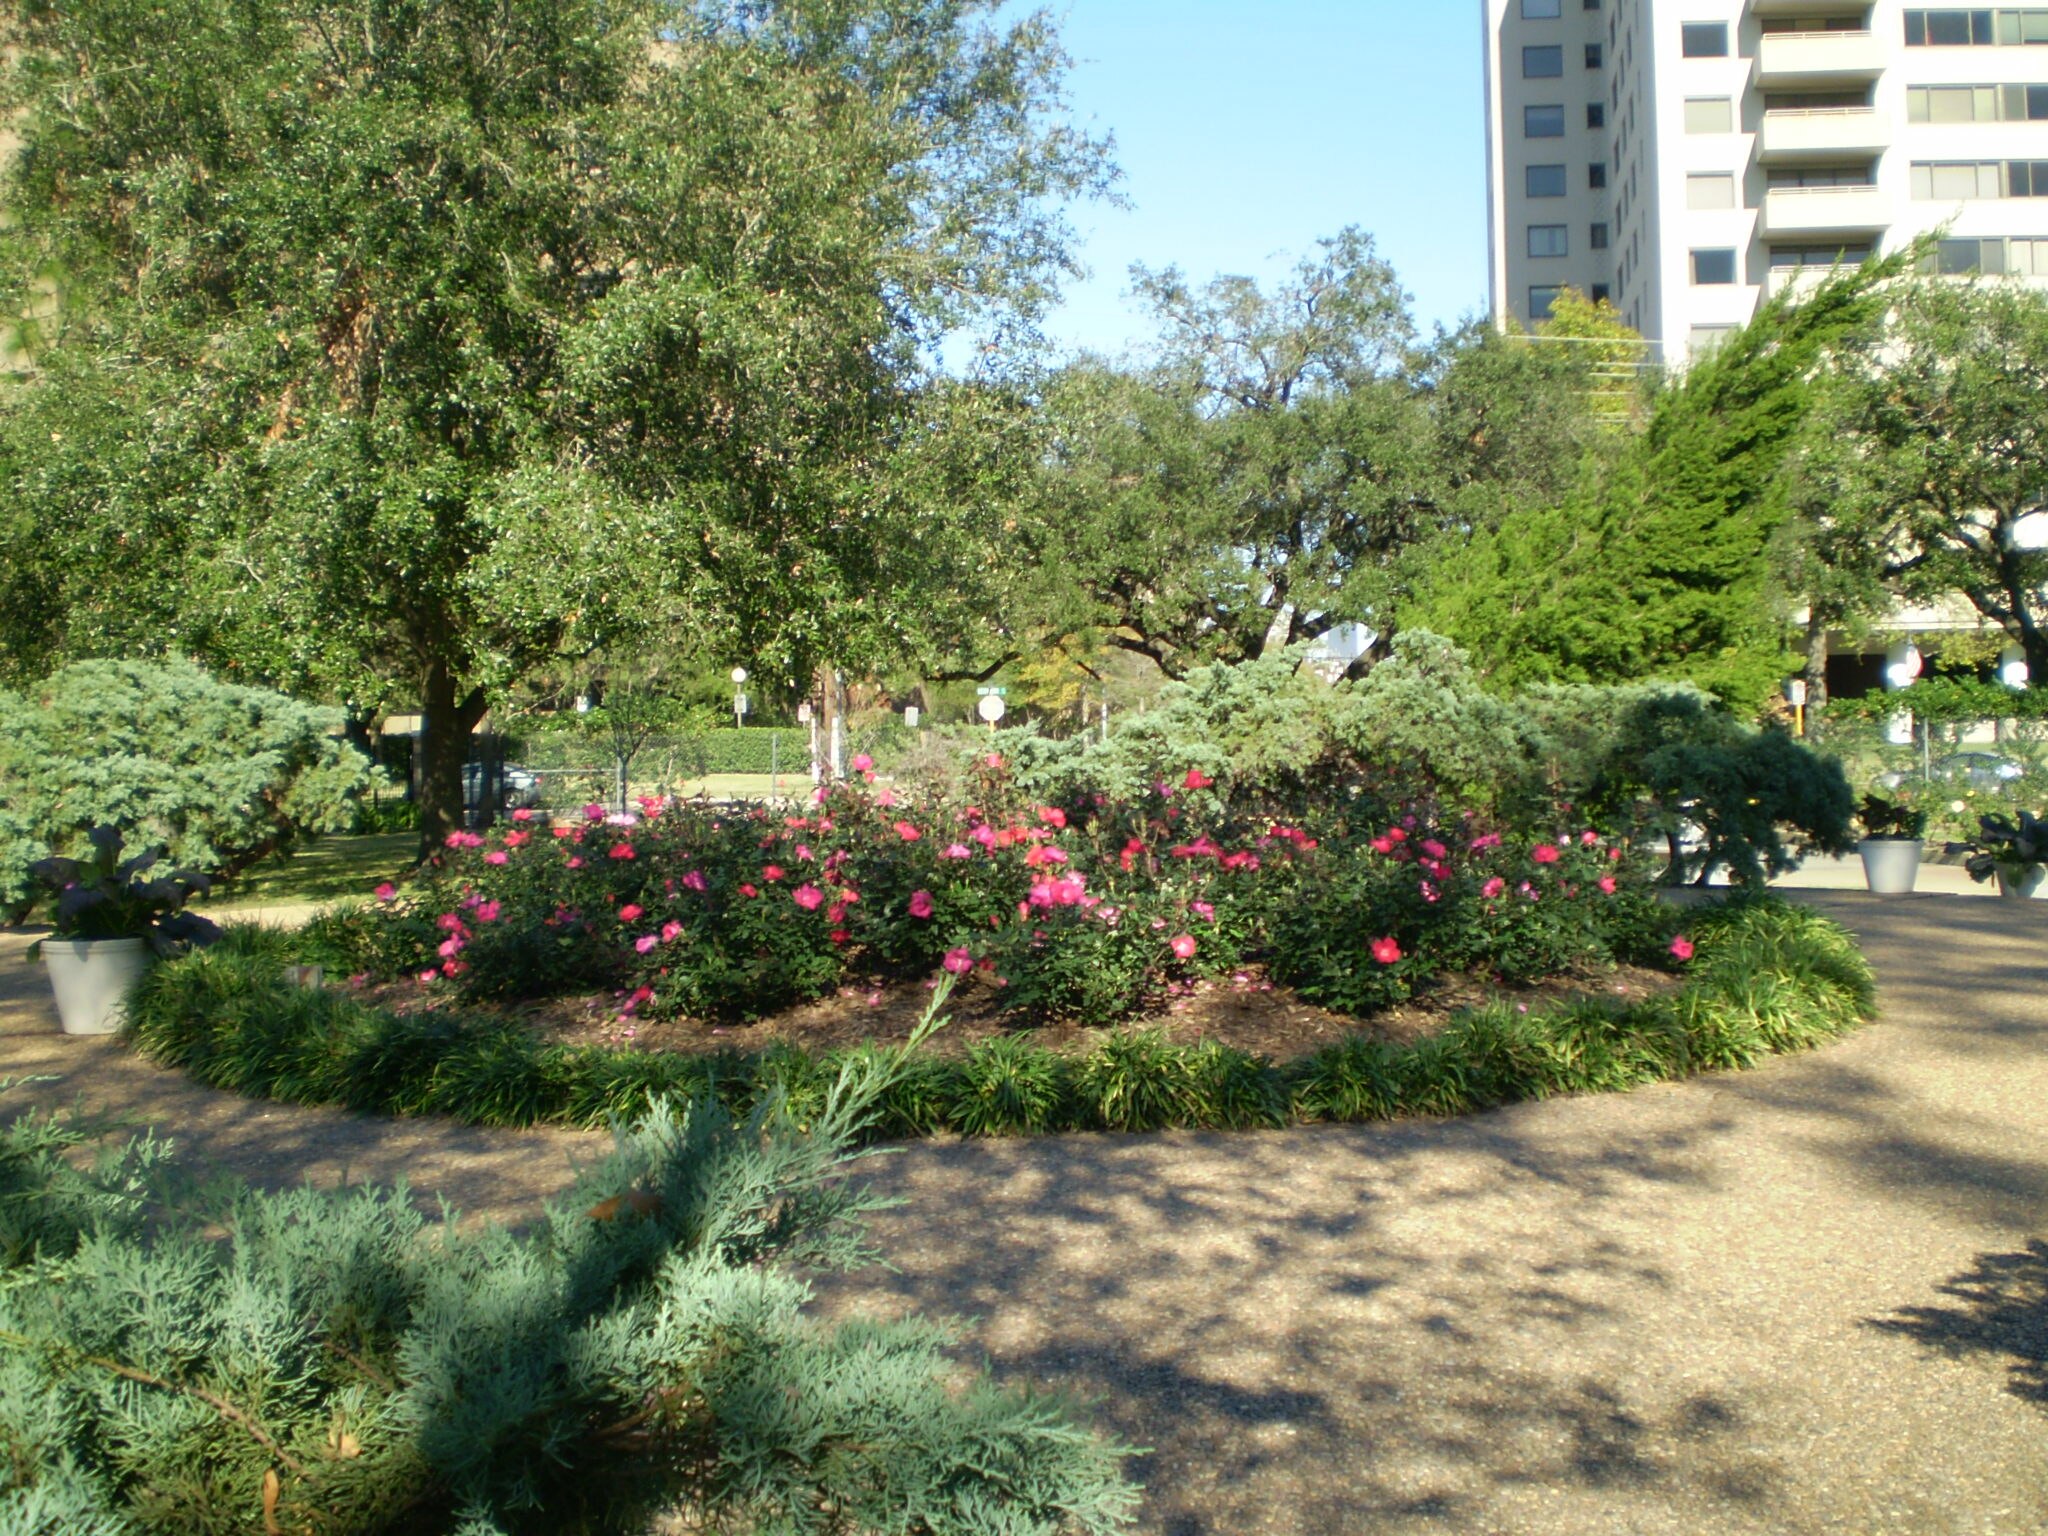 Lush flowers bloom at the McGovern Centennial Gardens in Hermann Park, located in the heart of Houston, Texas.